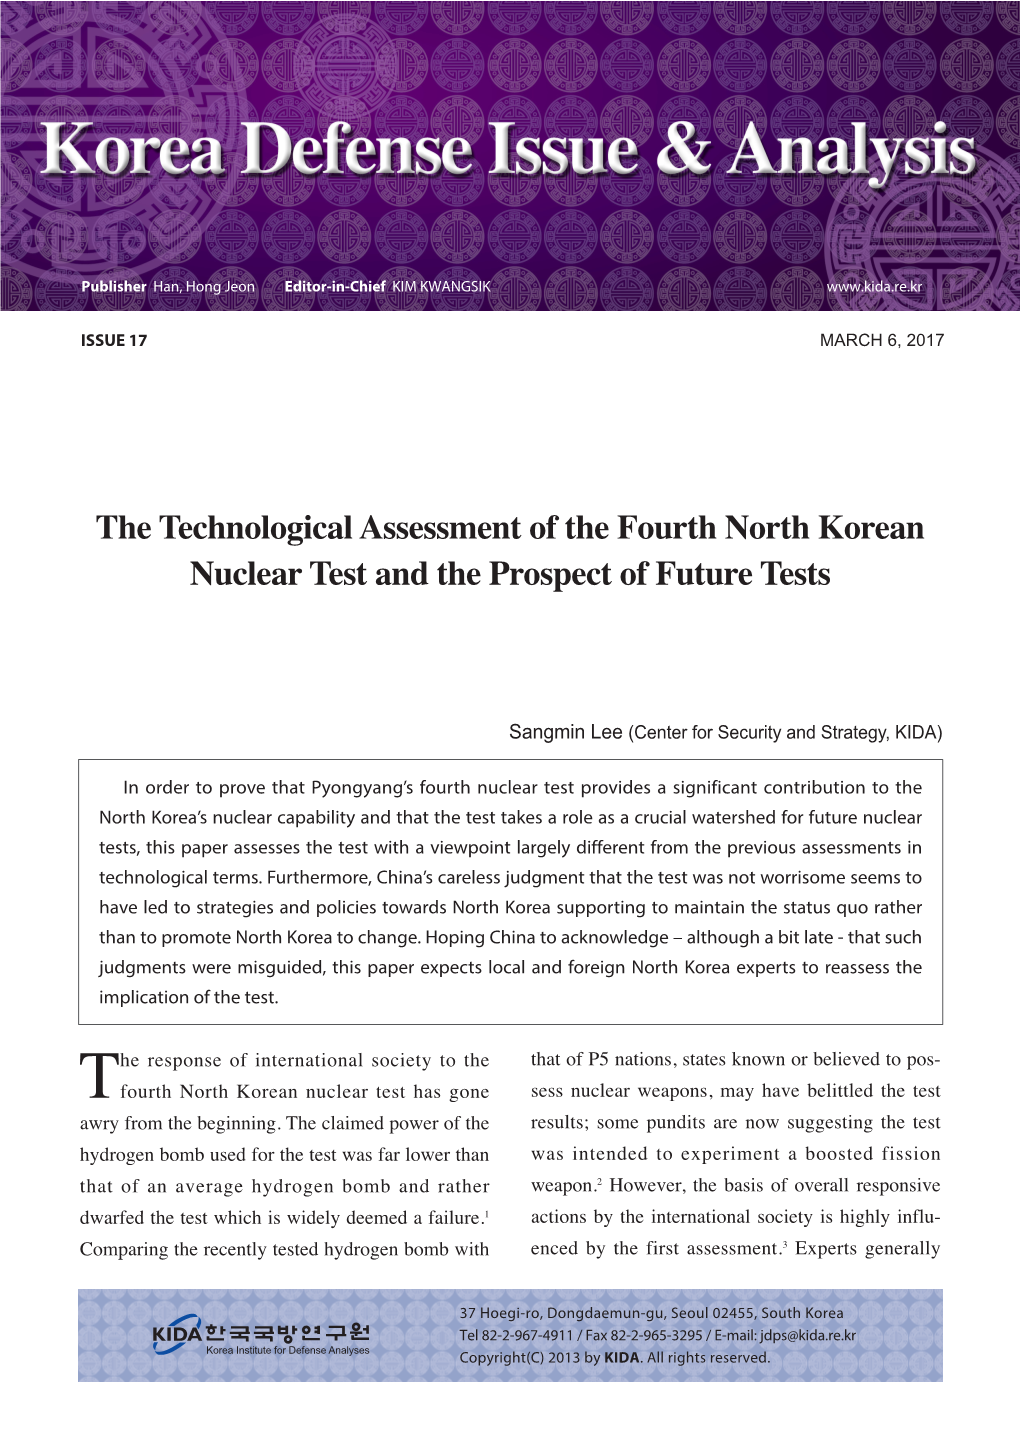 The Technological Assessment of the Fourth North Korean Nuclear Test and the Prospect of Future Tests